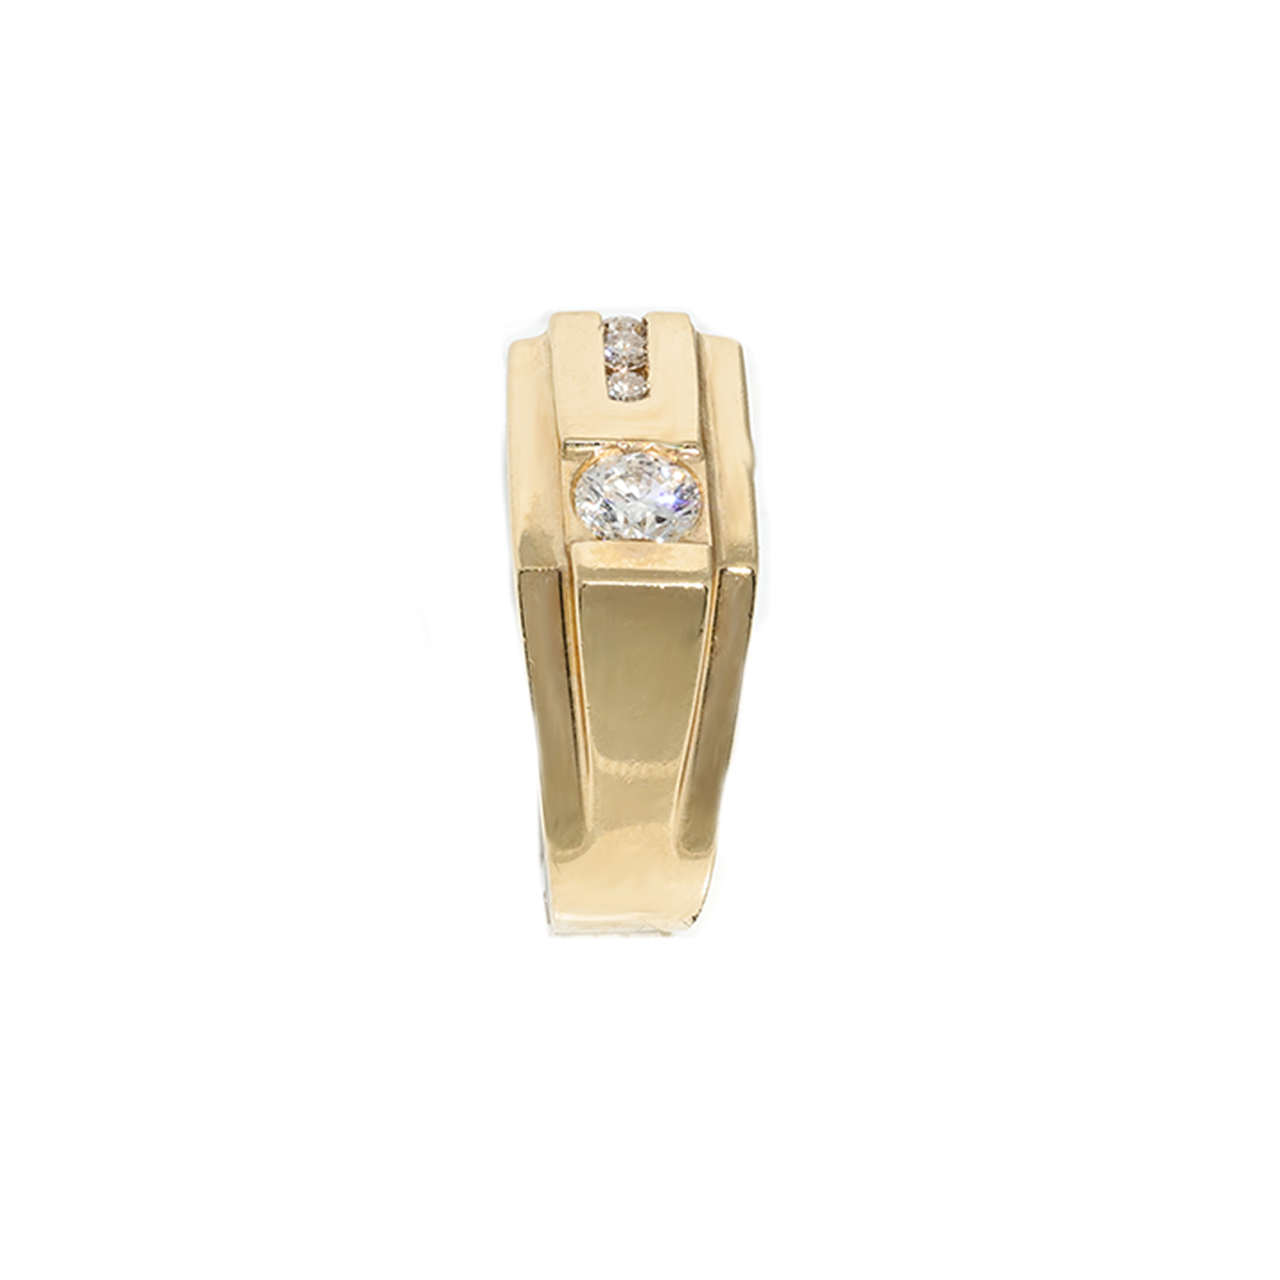 White Gold / 4 14K Solitare Yellow Gold Mens Diamond Pinky Ring .77 Ctw